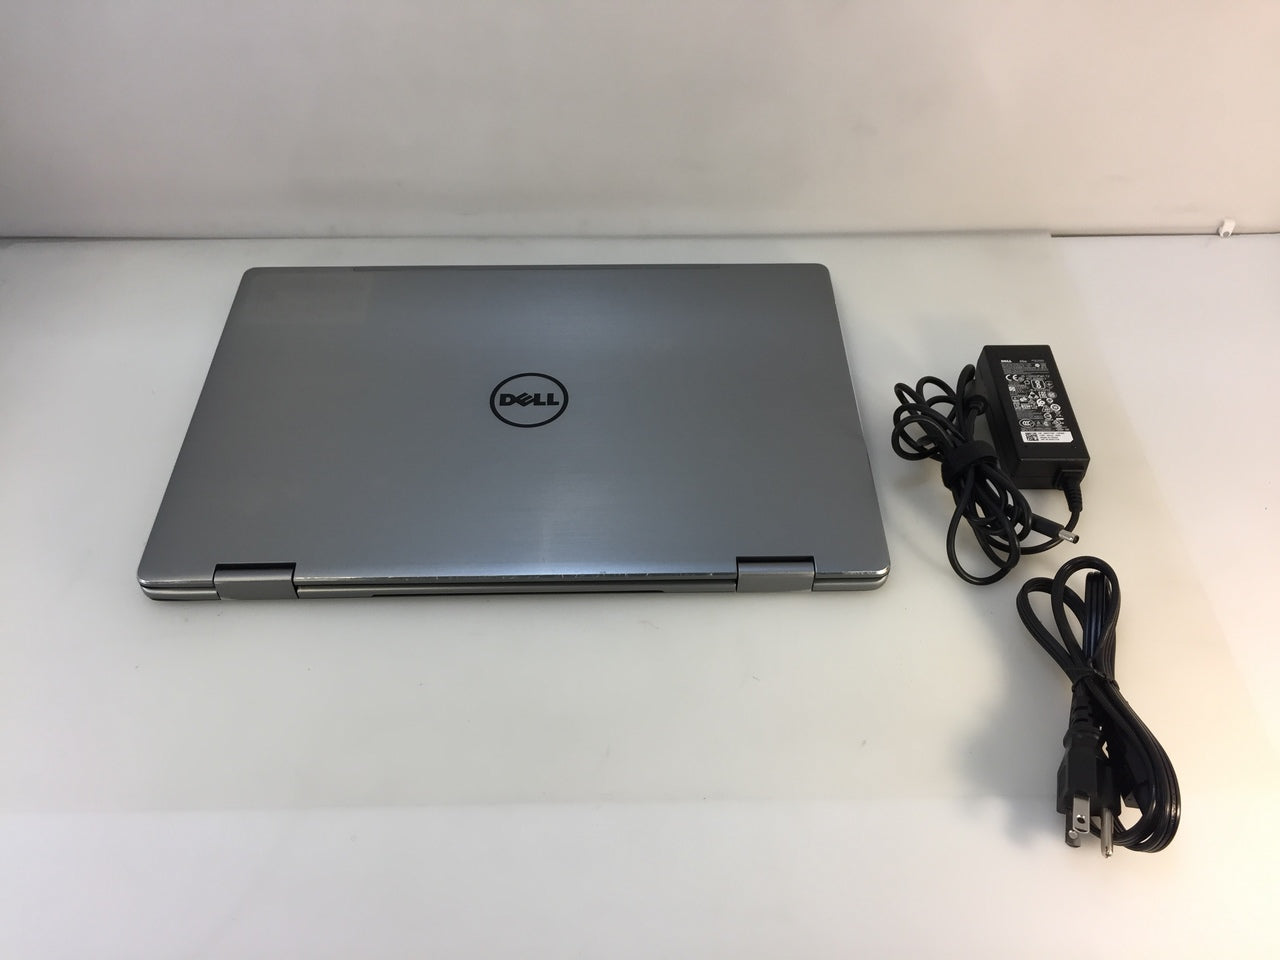 Dell Inspiron 15 7579 2-in-1 laptop 15.6 Touch, i5-7200U 2.5GHz